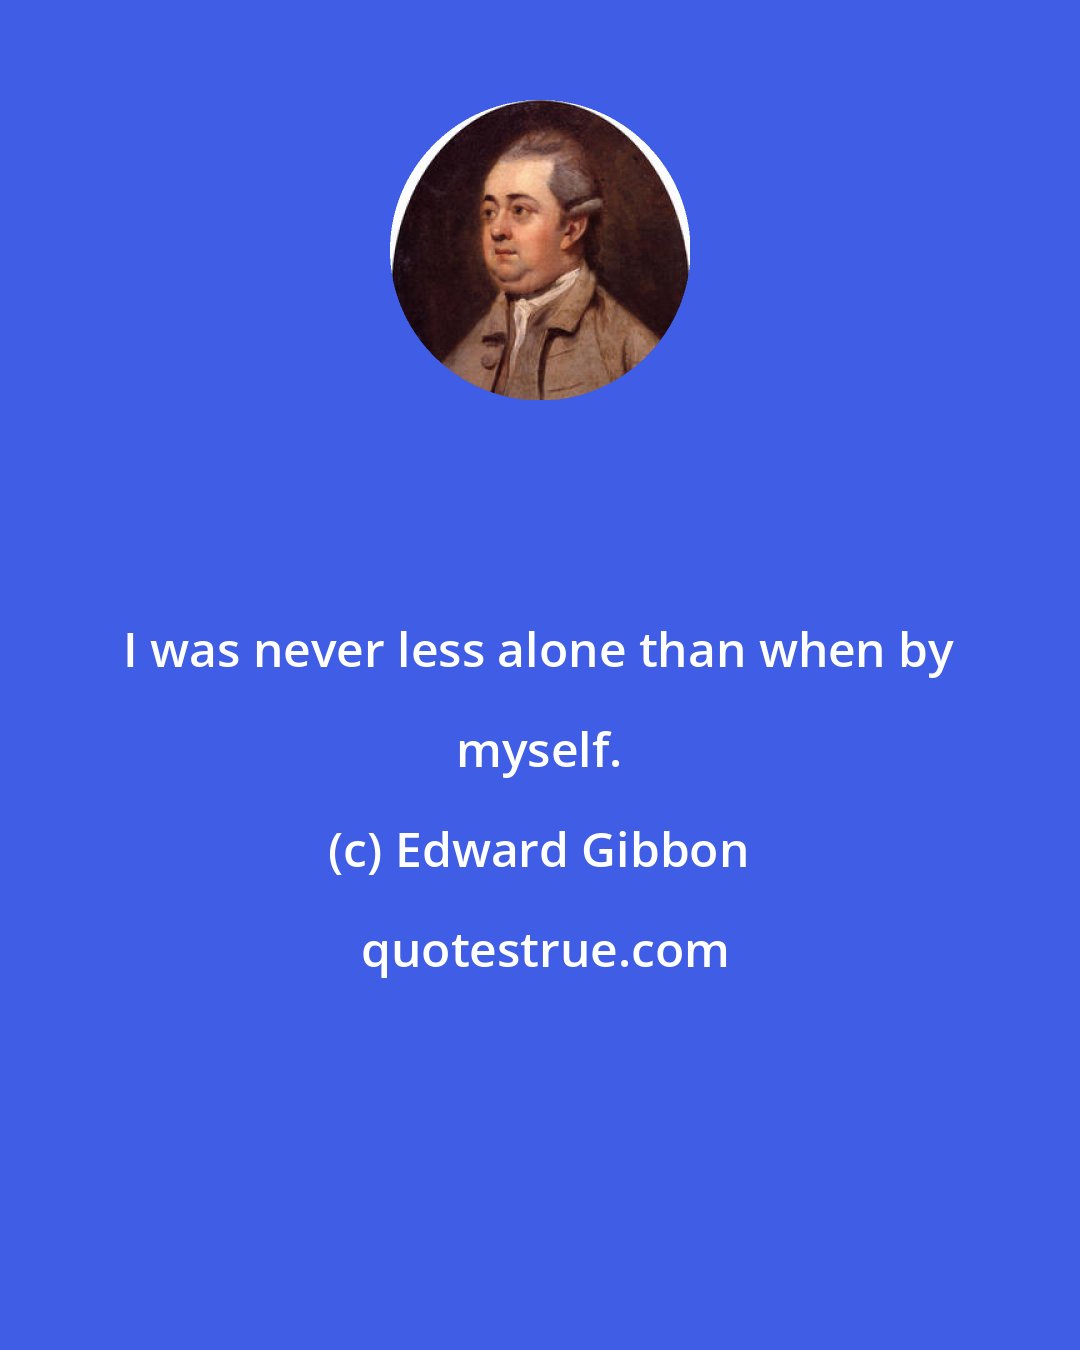 Edward Gibbon: I was never less alone than when by myself.